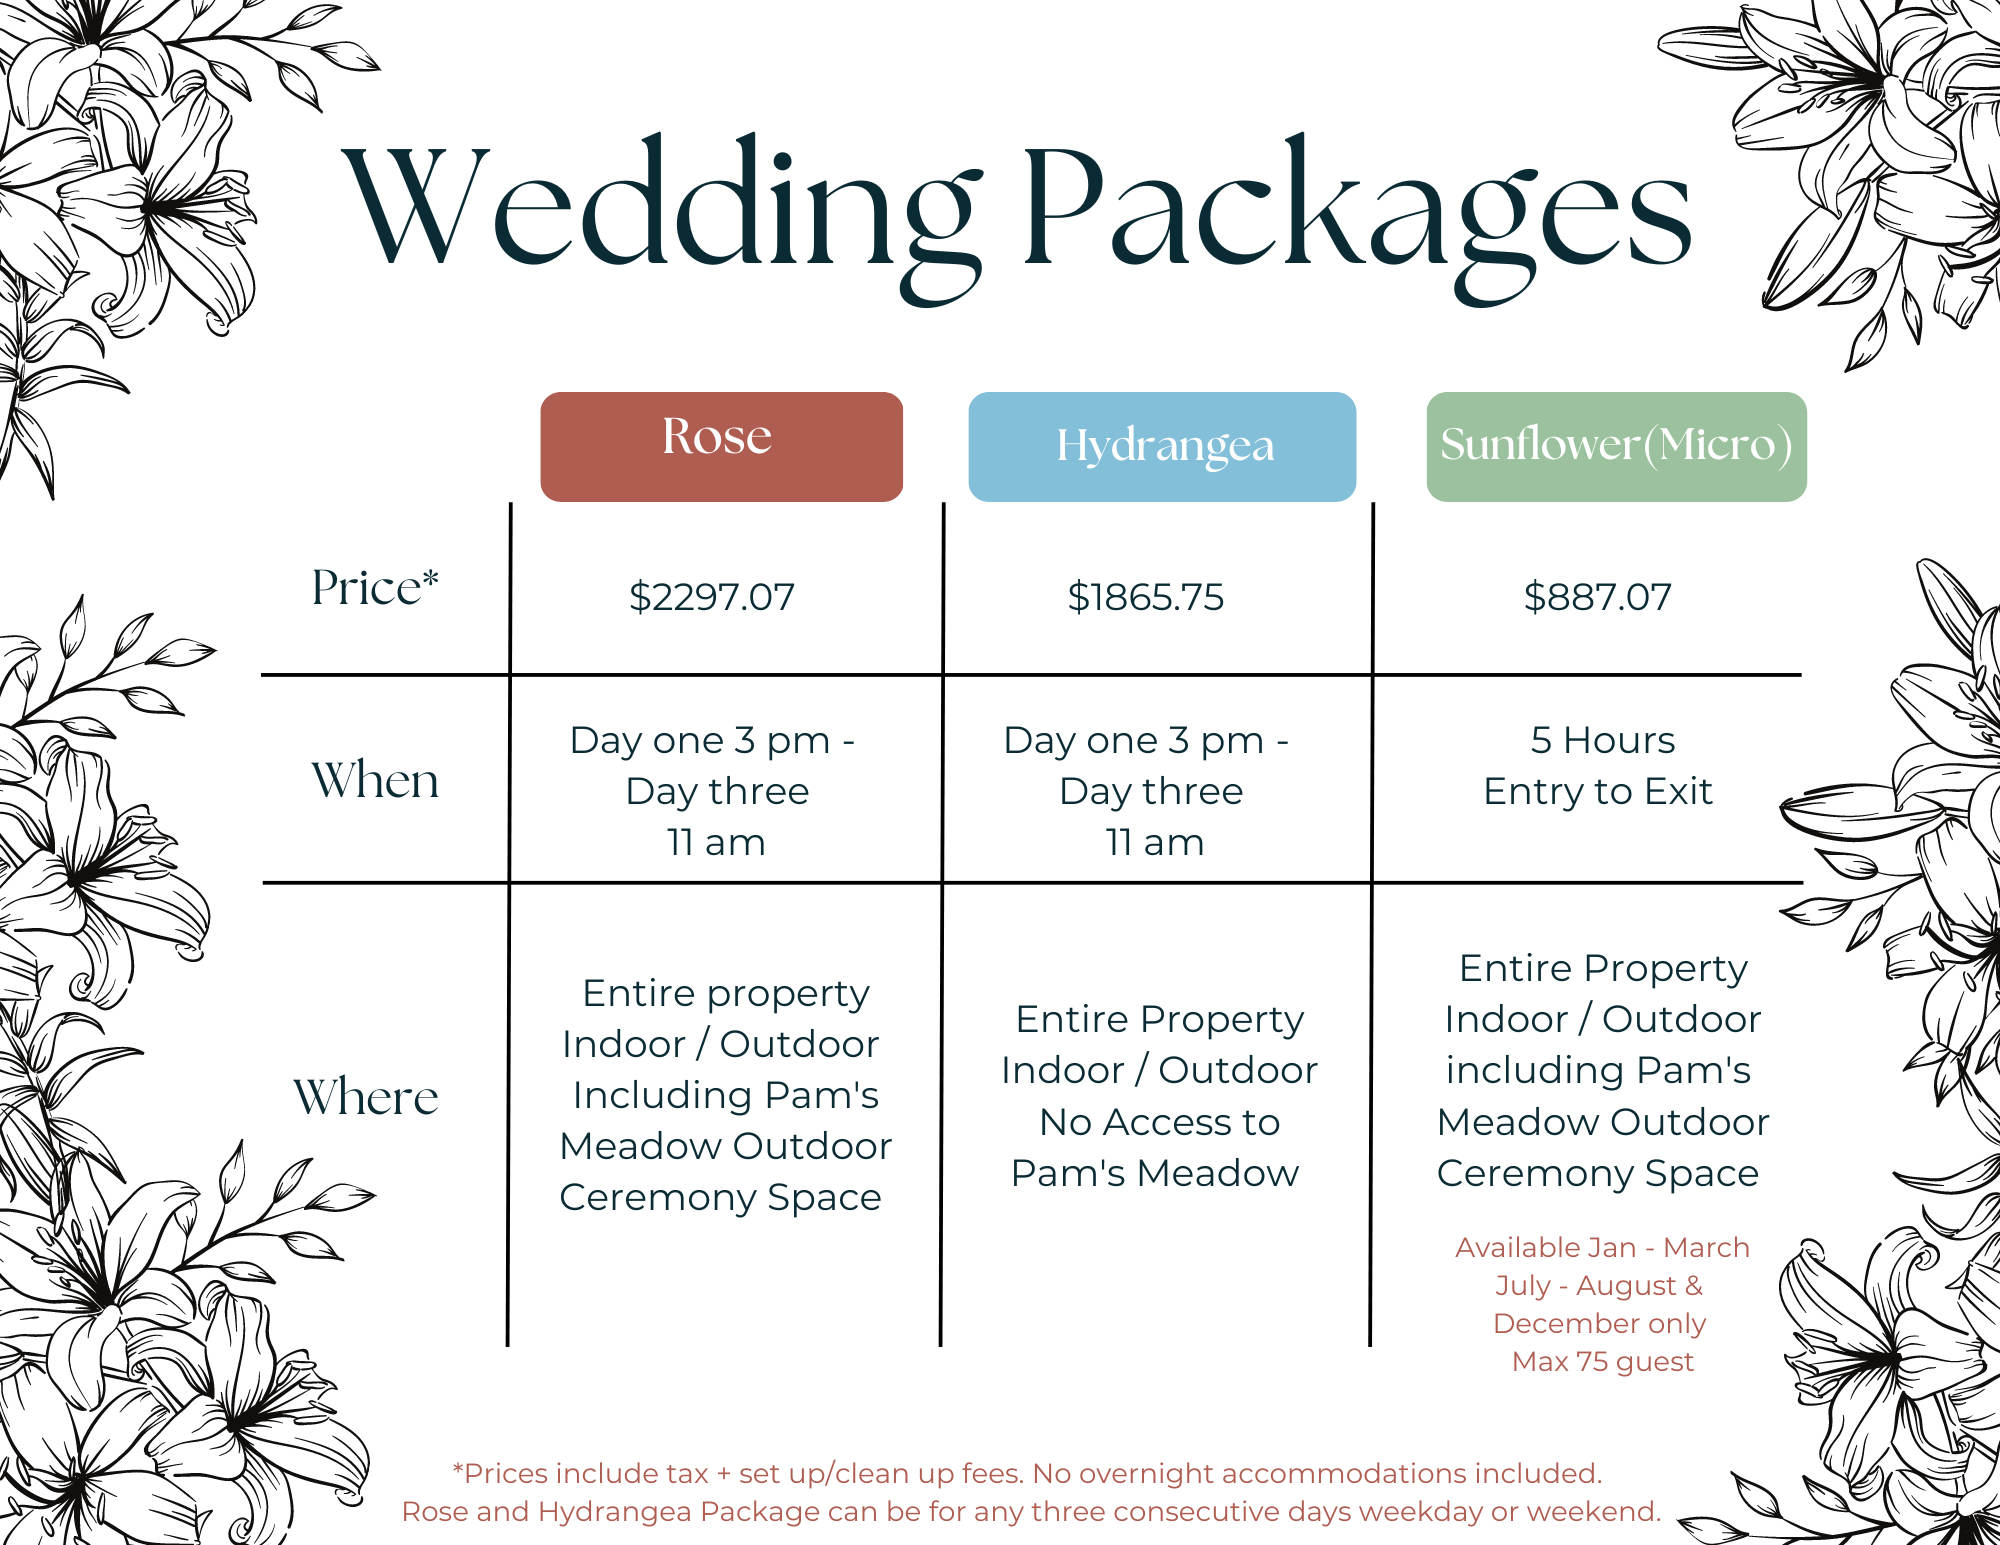 Weekend Wedding Packages Union City, TN